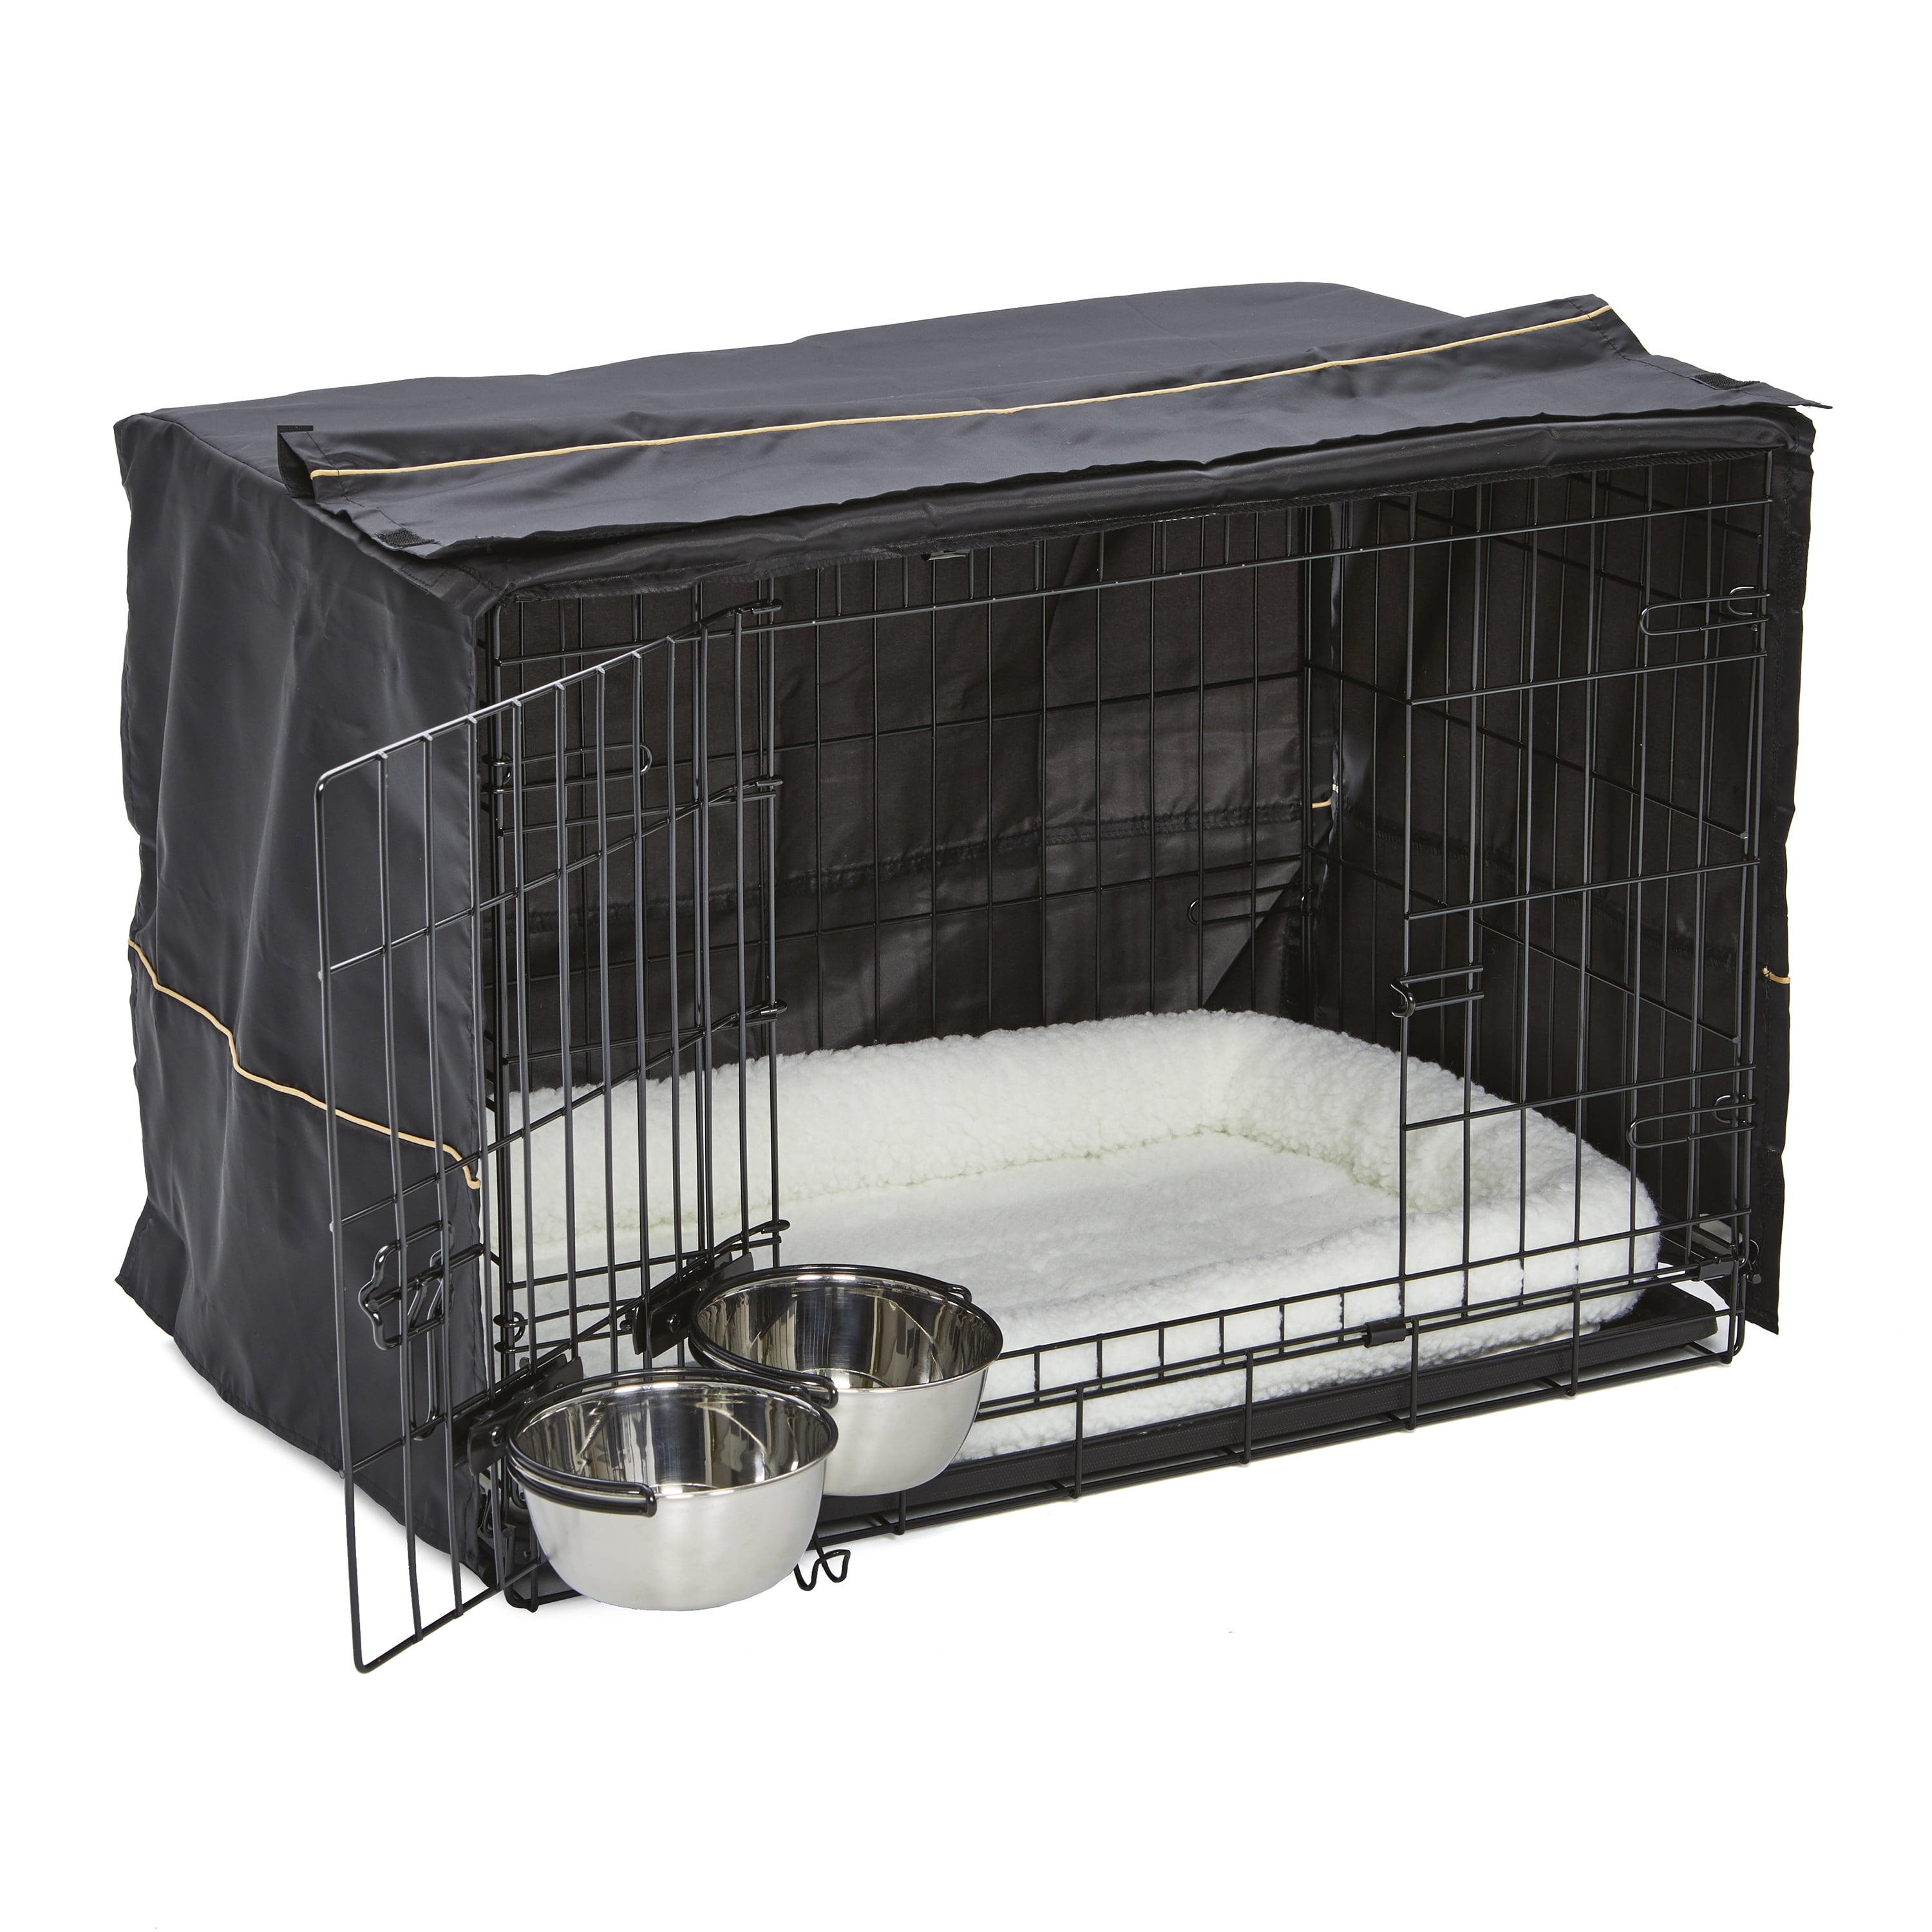 bedding for dog crate